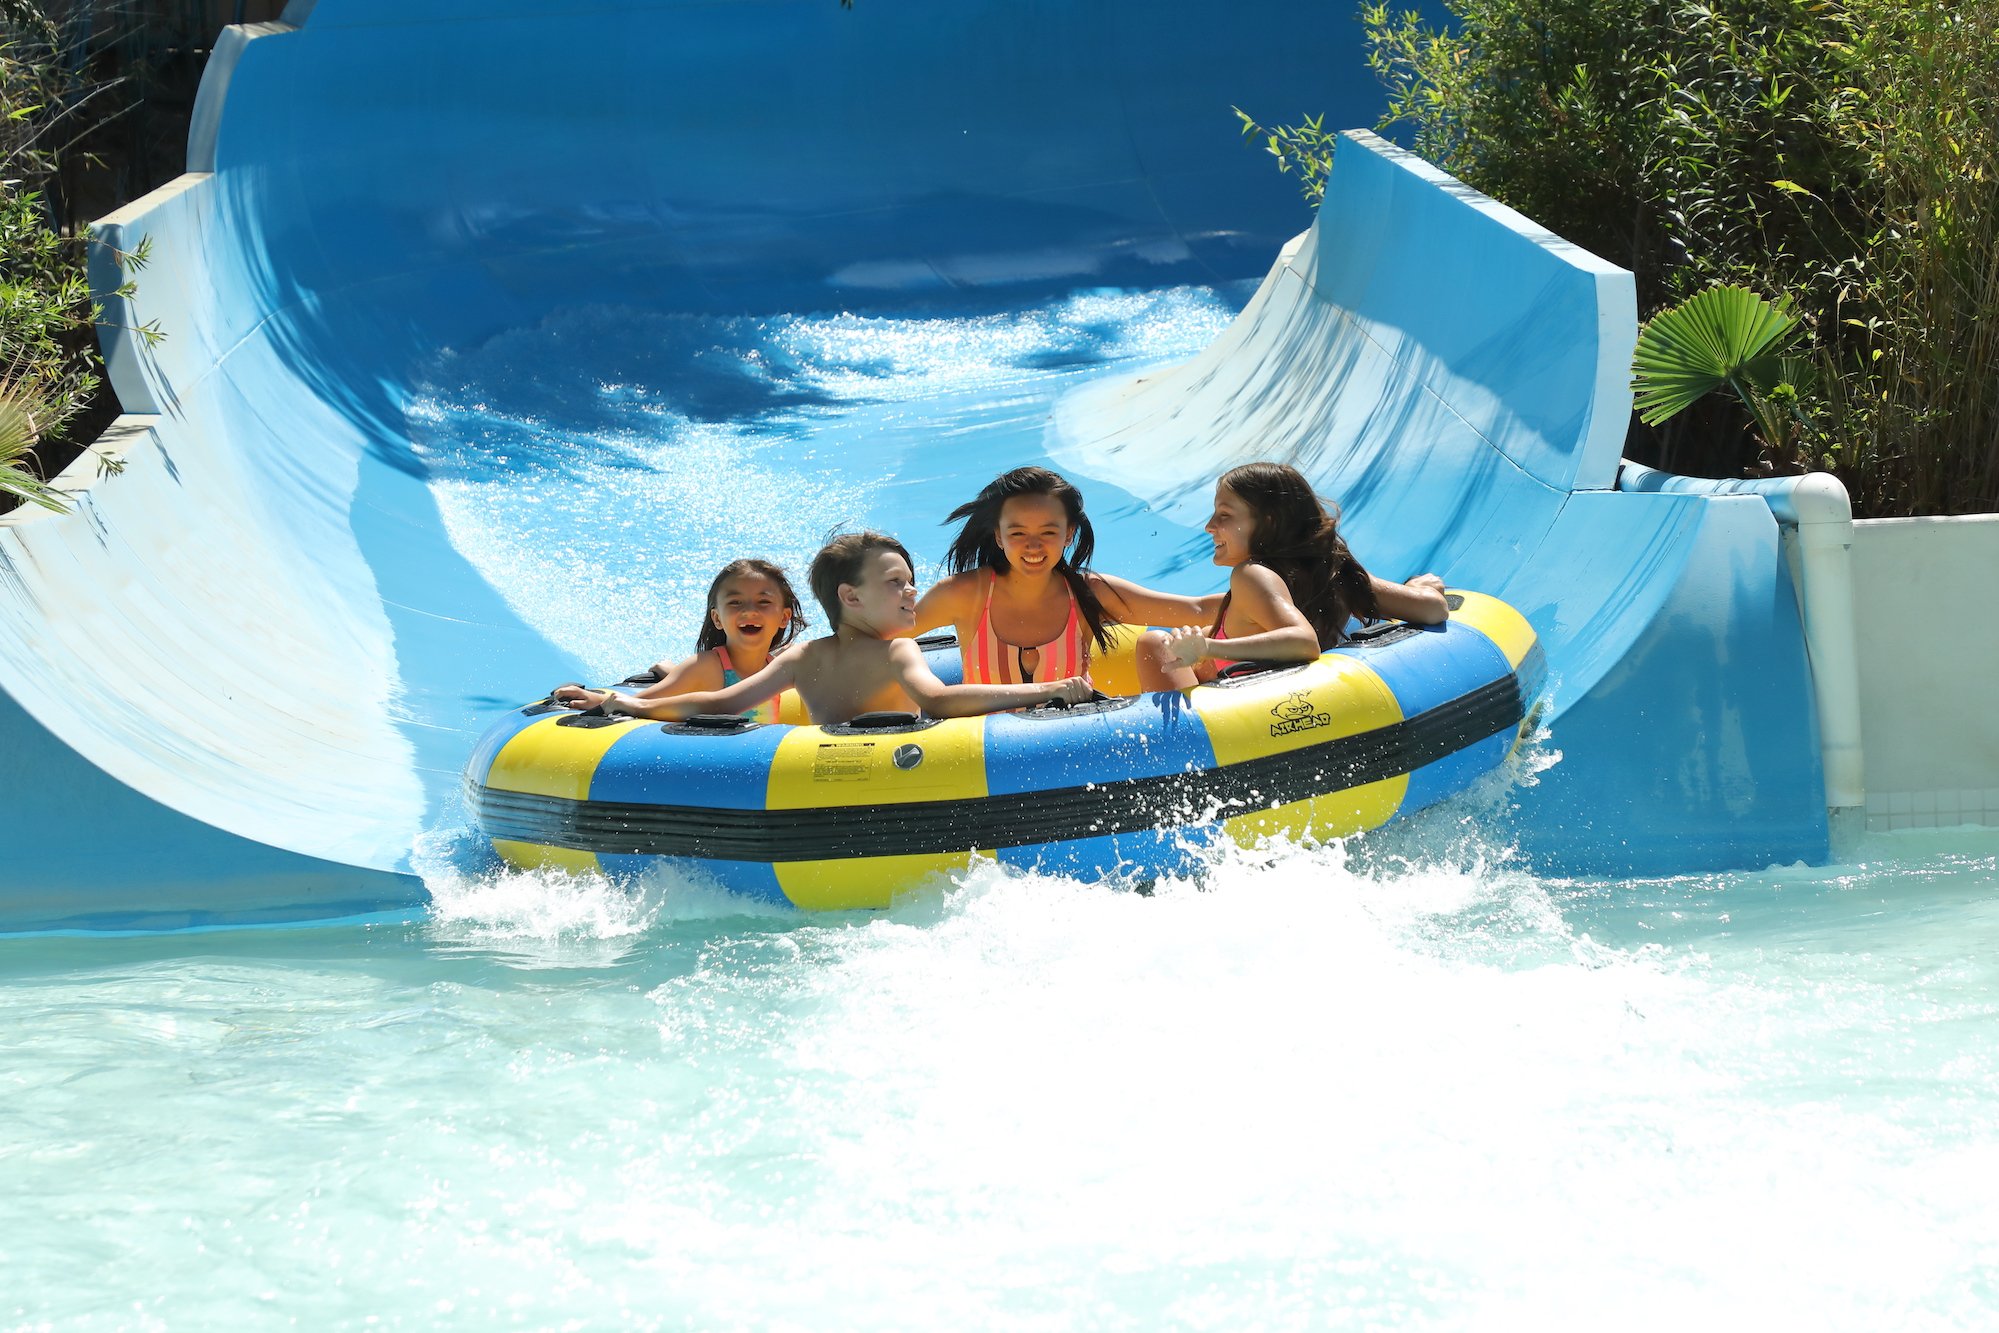 4 young park visitors riding the Lost Temple Rapids at Six Flags Magic Mountain.